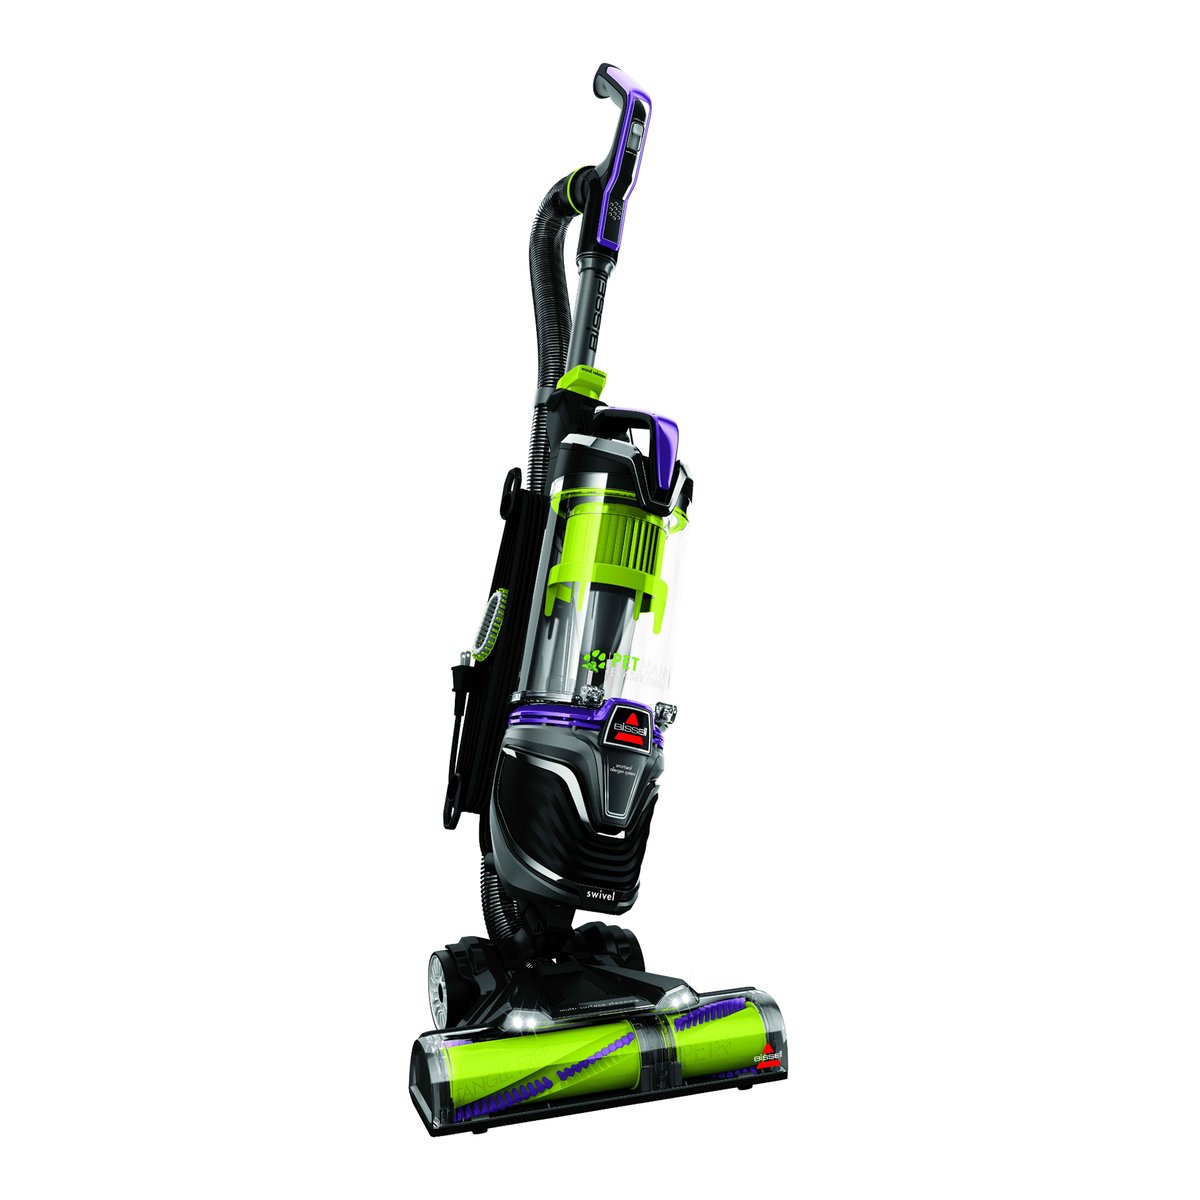 Bissell Pet Upright Vacuum Cleaner 2454E 1LTR